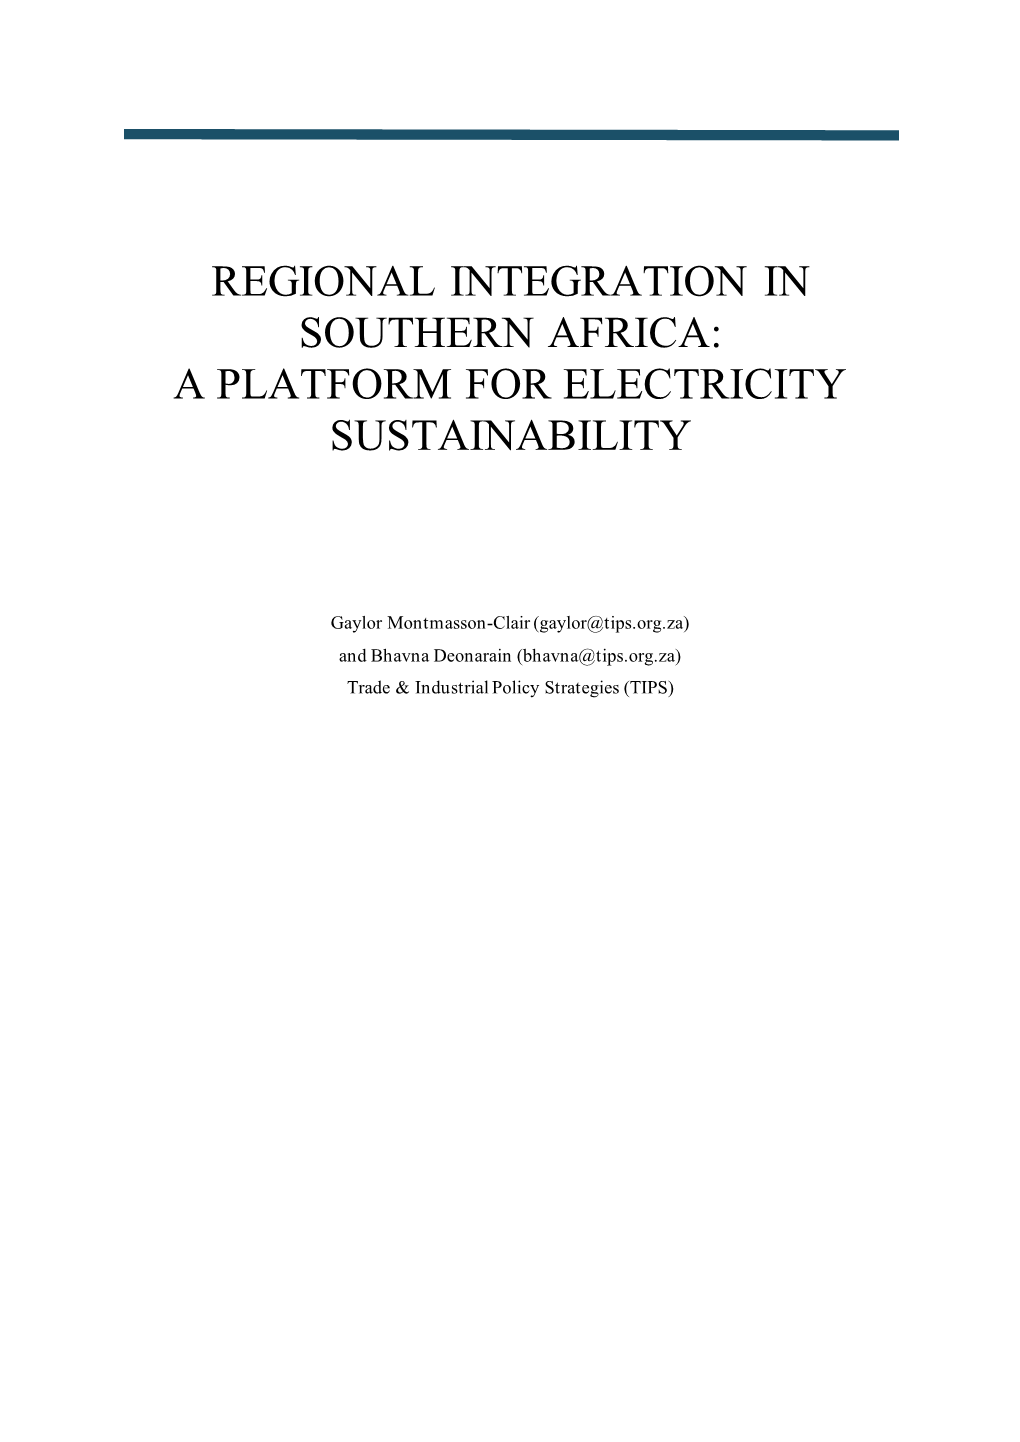 Regional Integration in Southern Africa: a Platform for Electricity Sustainability